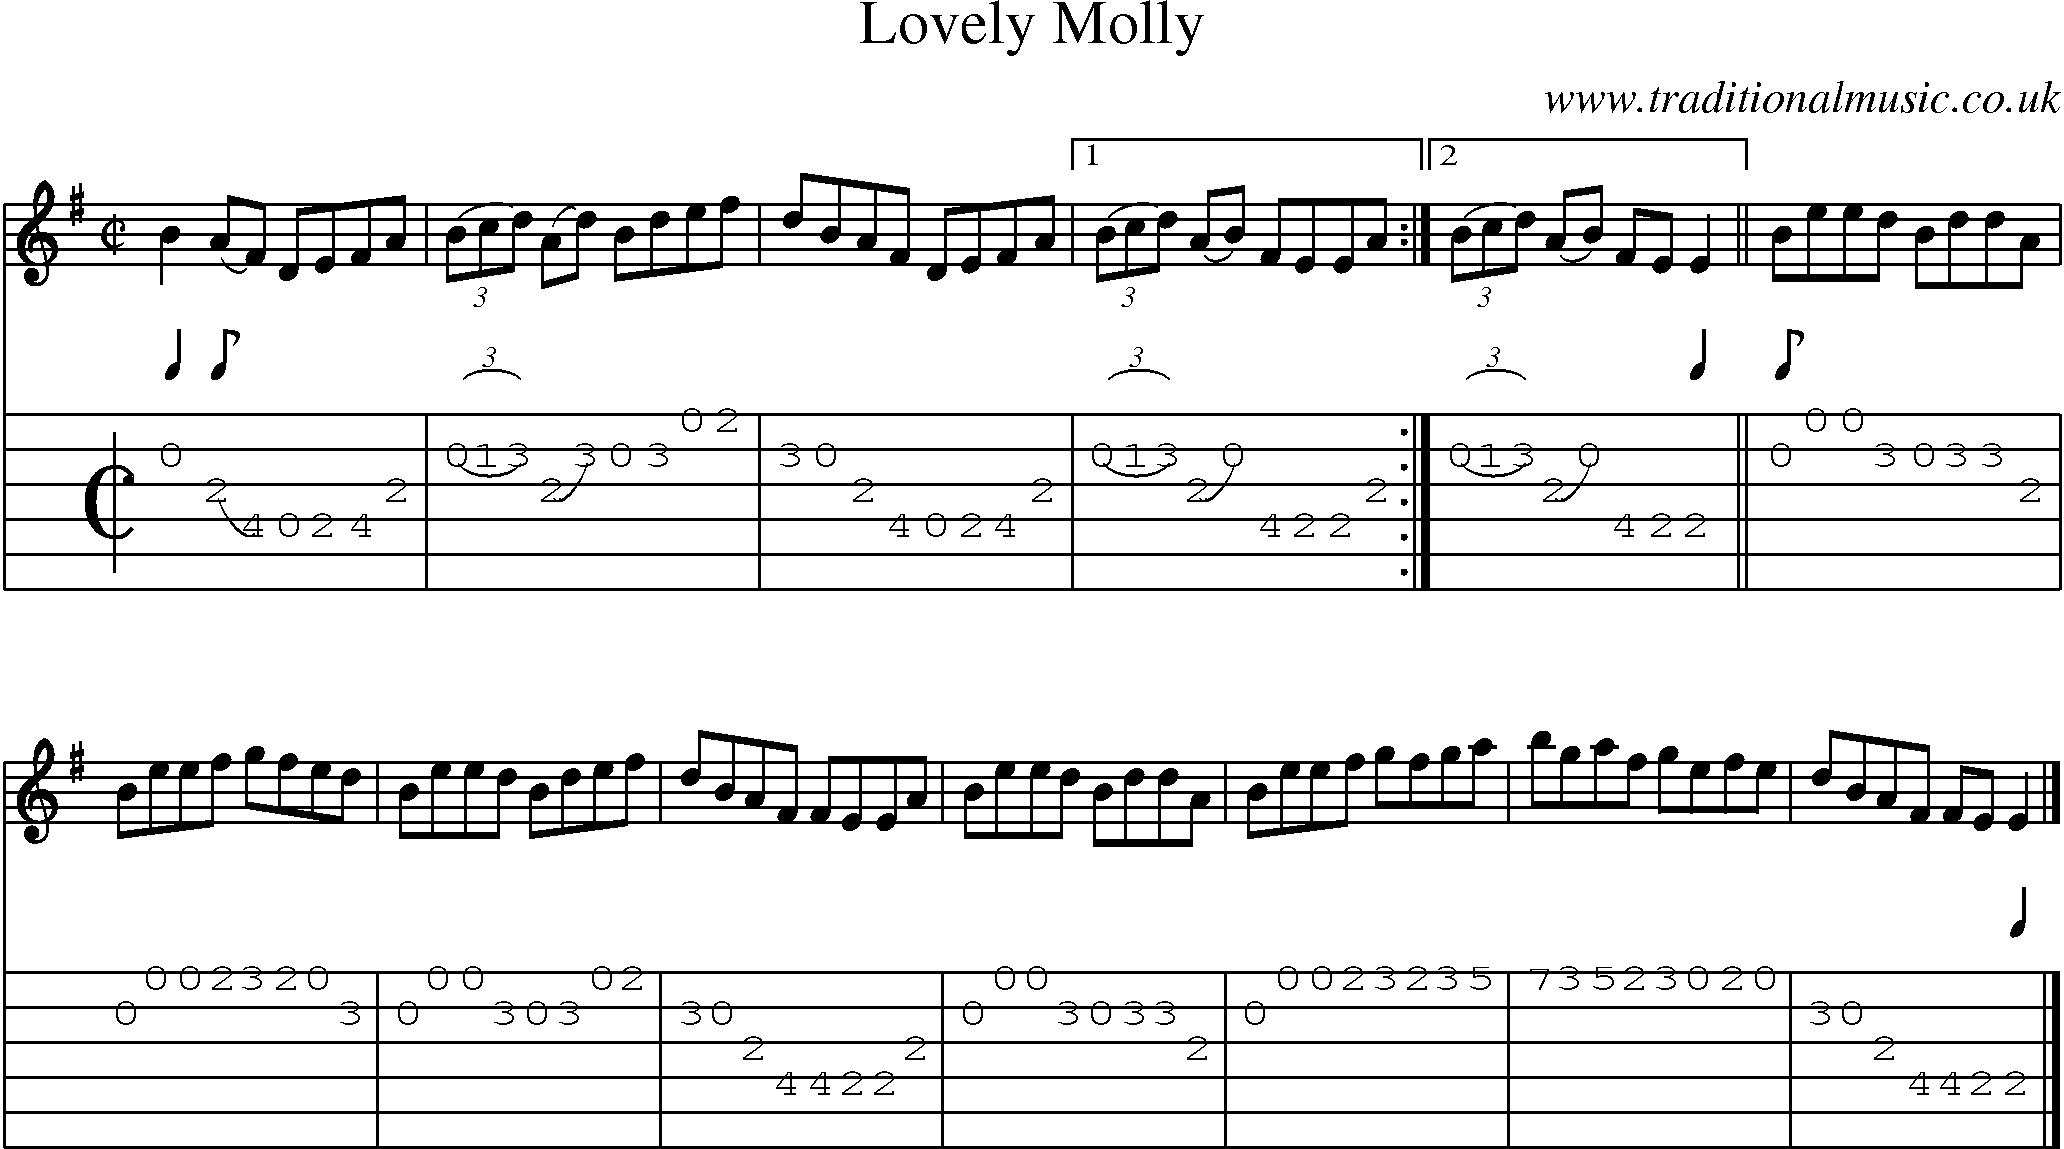 Music Score and Guitar Tabs for Lovely Molly